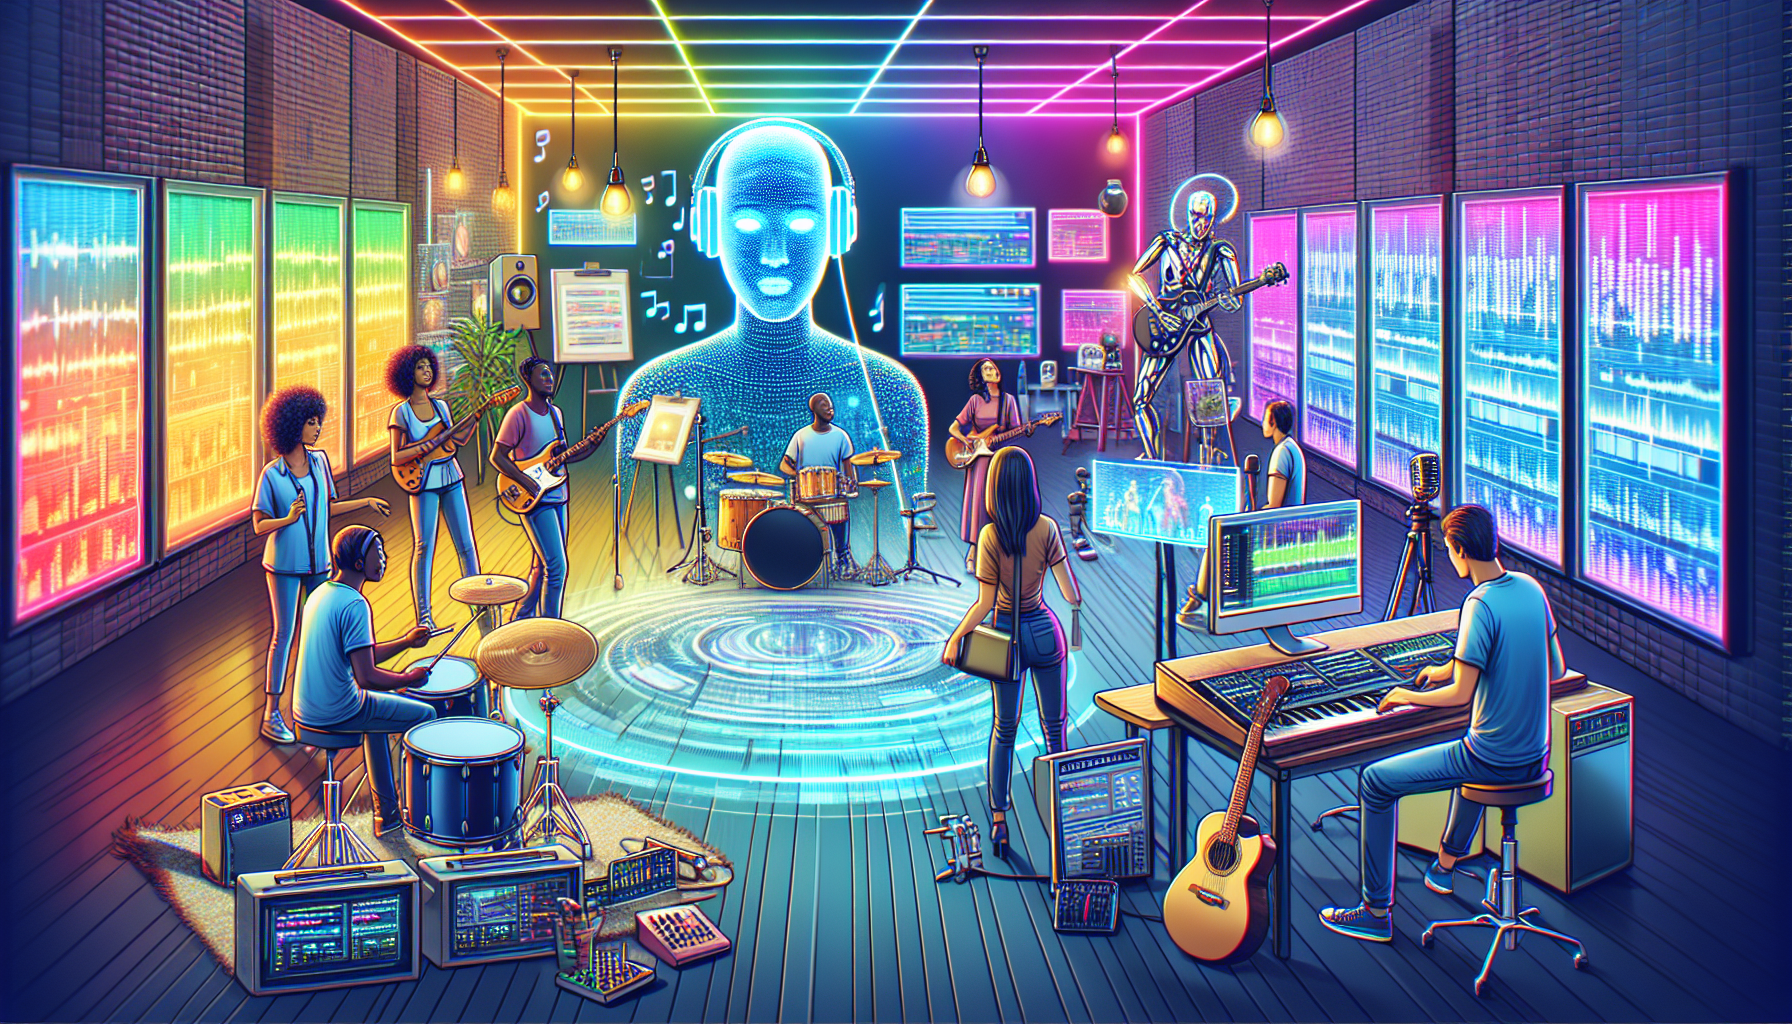 Create an image depicting the fusion of artificial intelligence and music video screenwriting. Show a futuristic music studio where a holographic AI collaborates with human artists. Include elements l